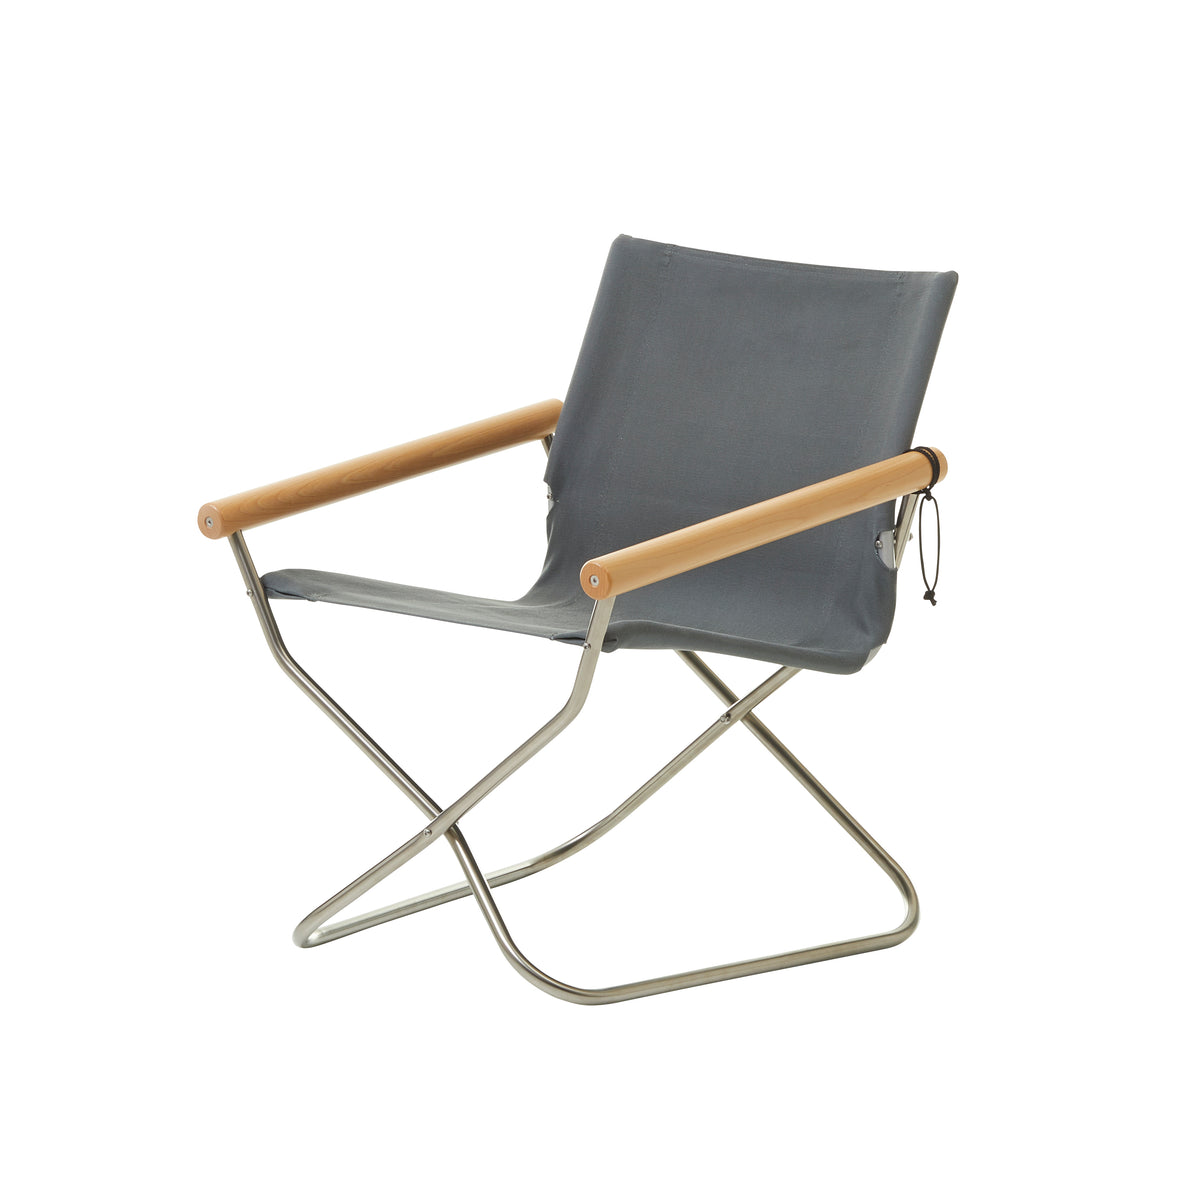 Nychair X, Nychair X 80, Gray- Placewares